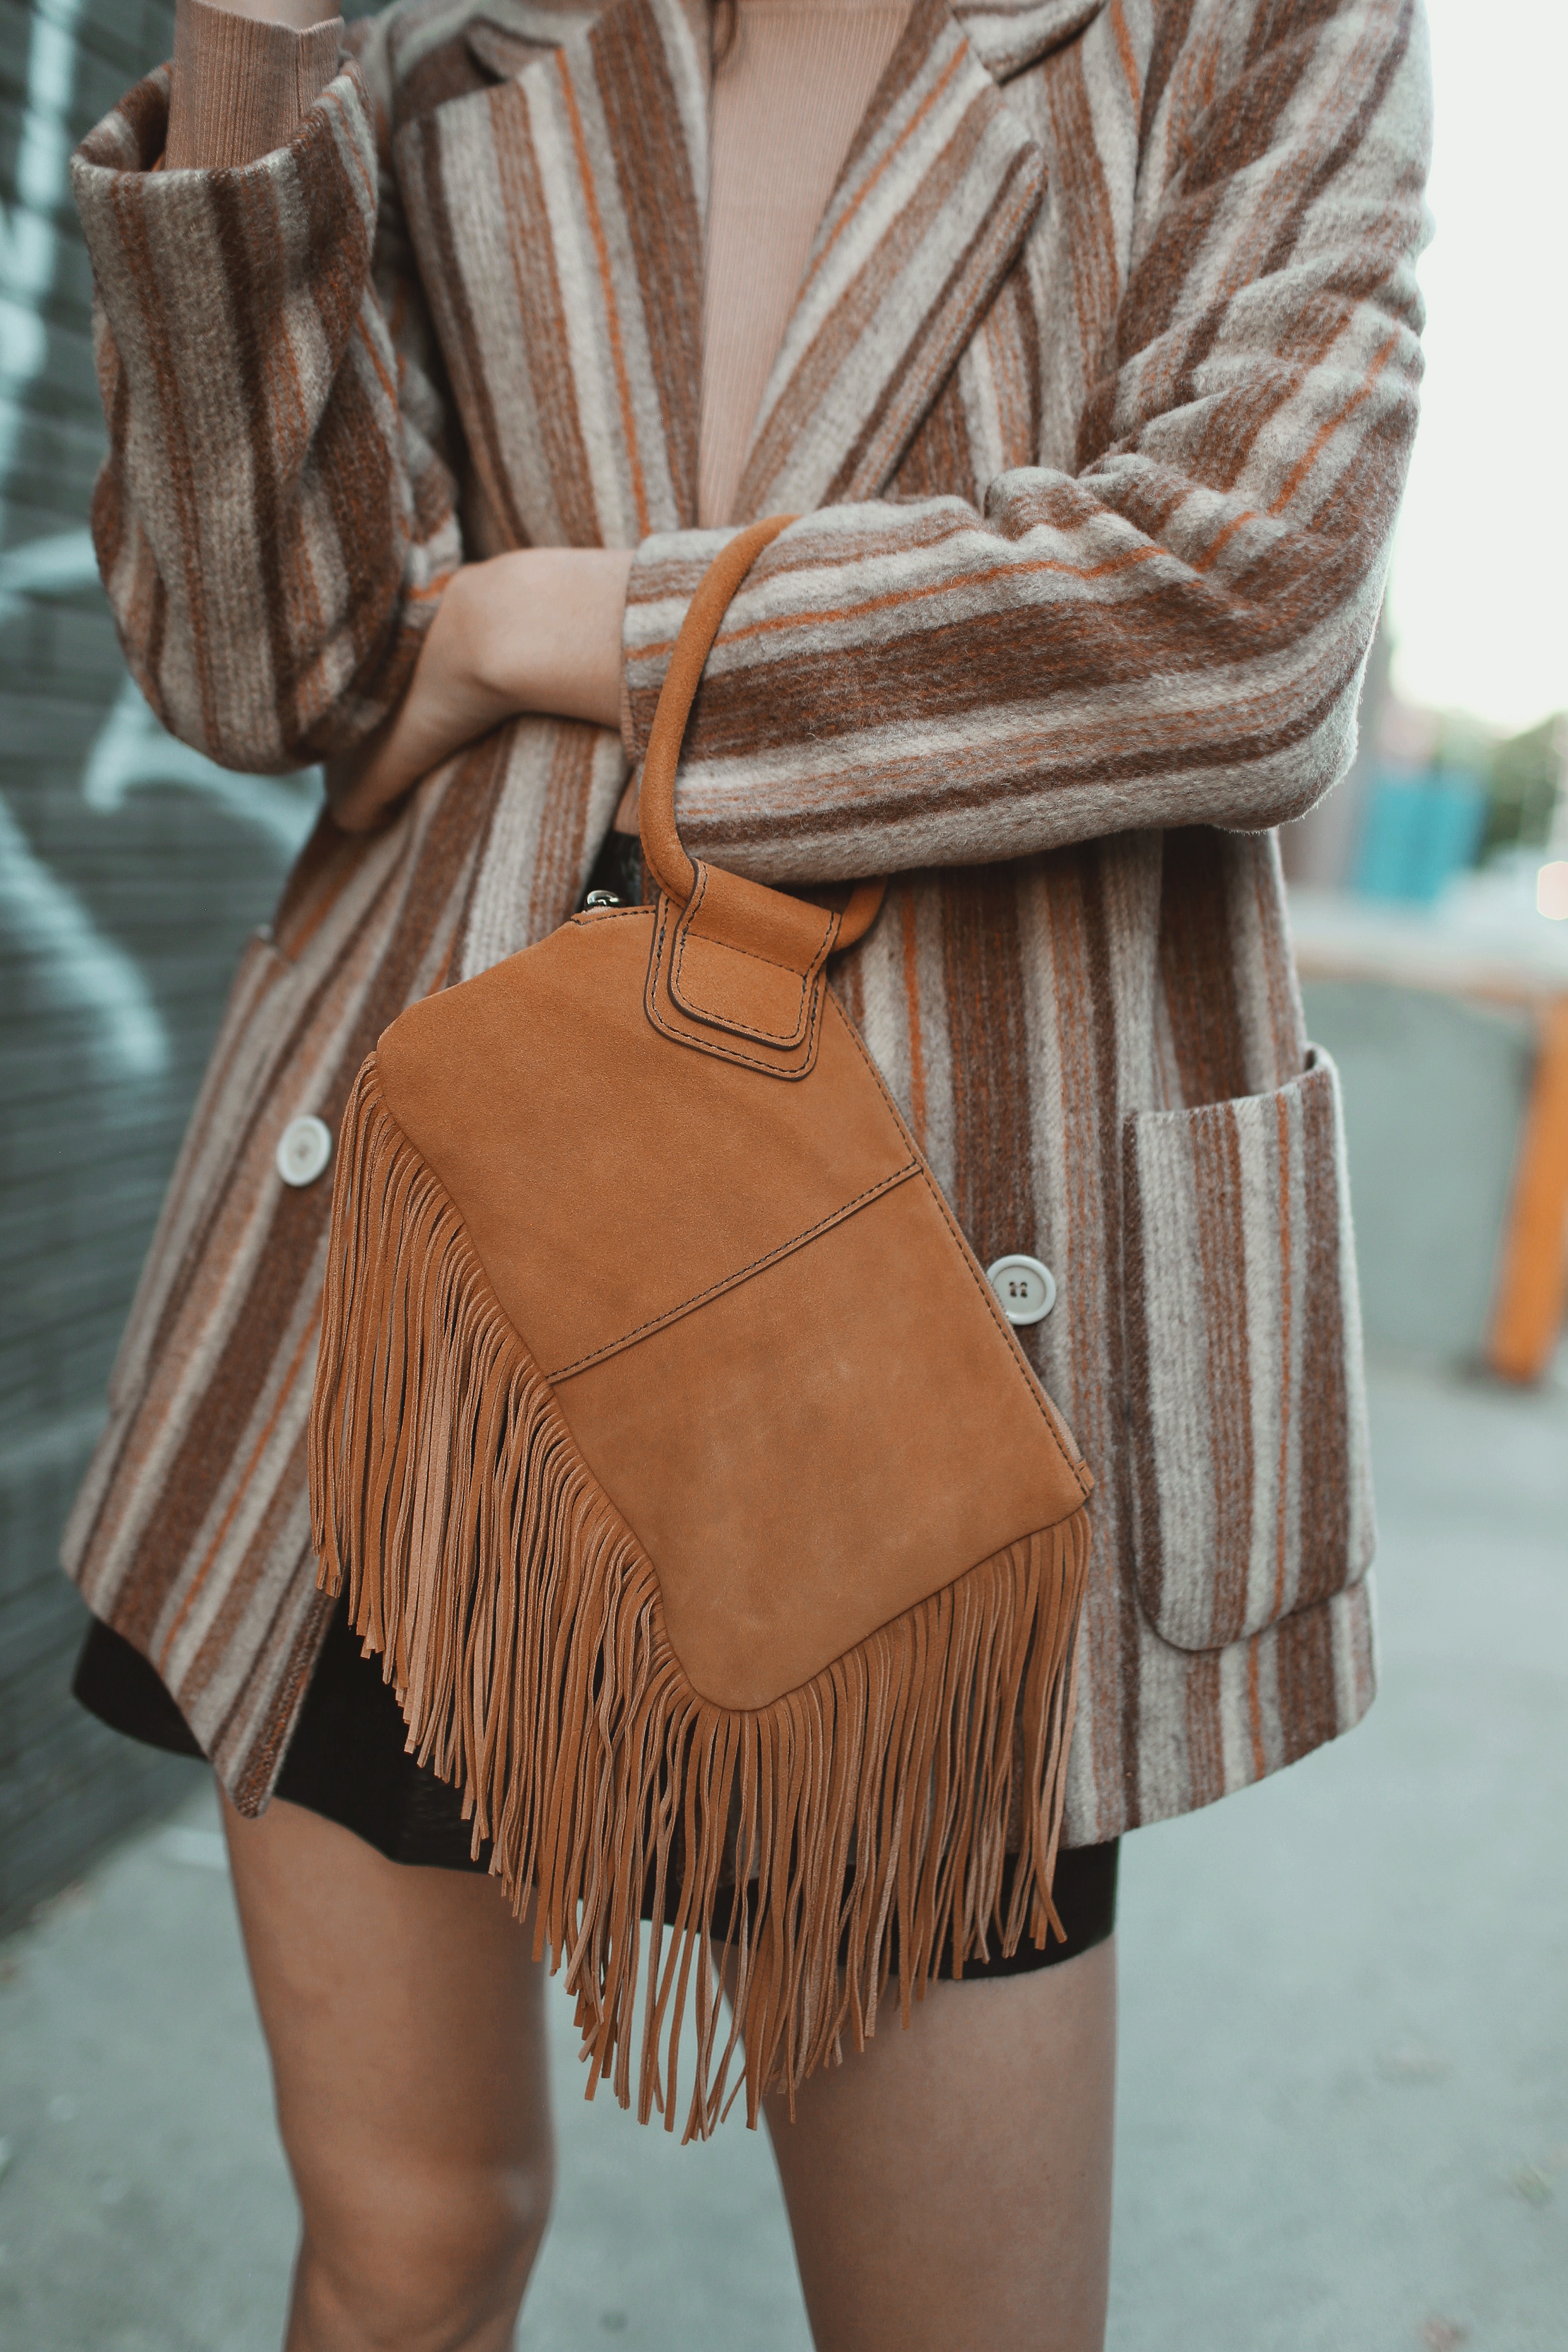 How to Style Hobo Suede Like a City Girl